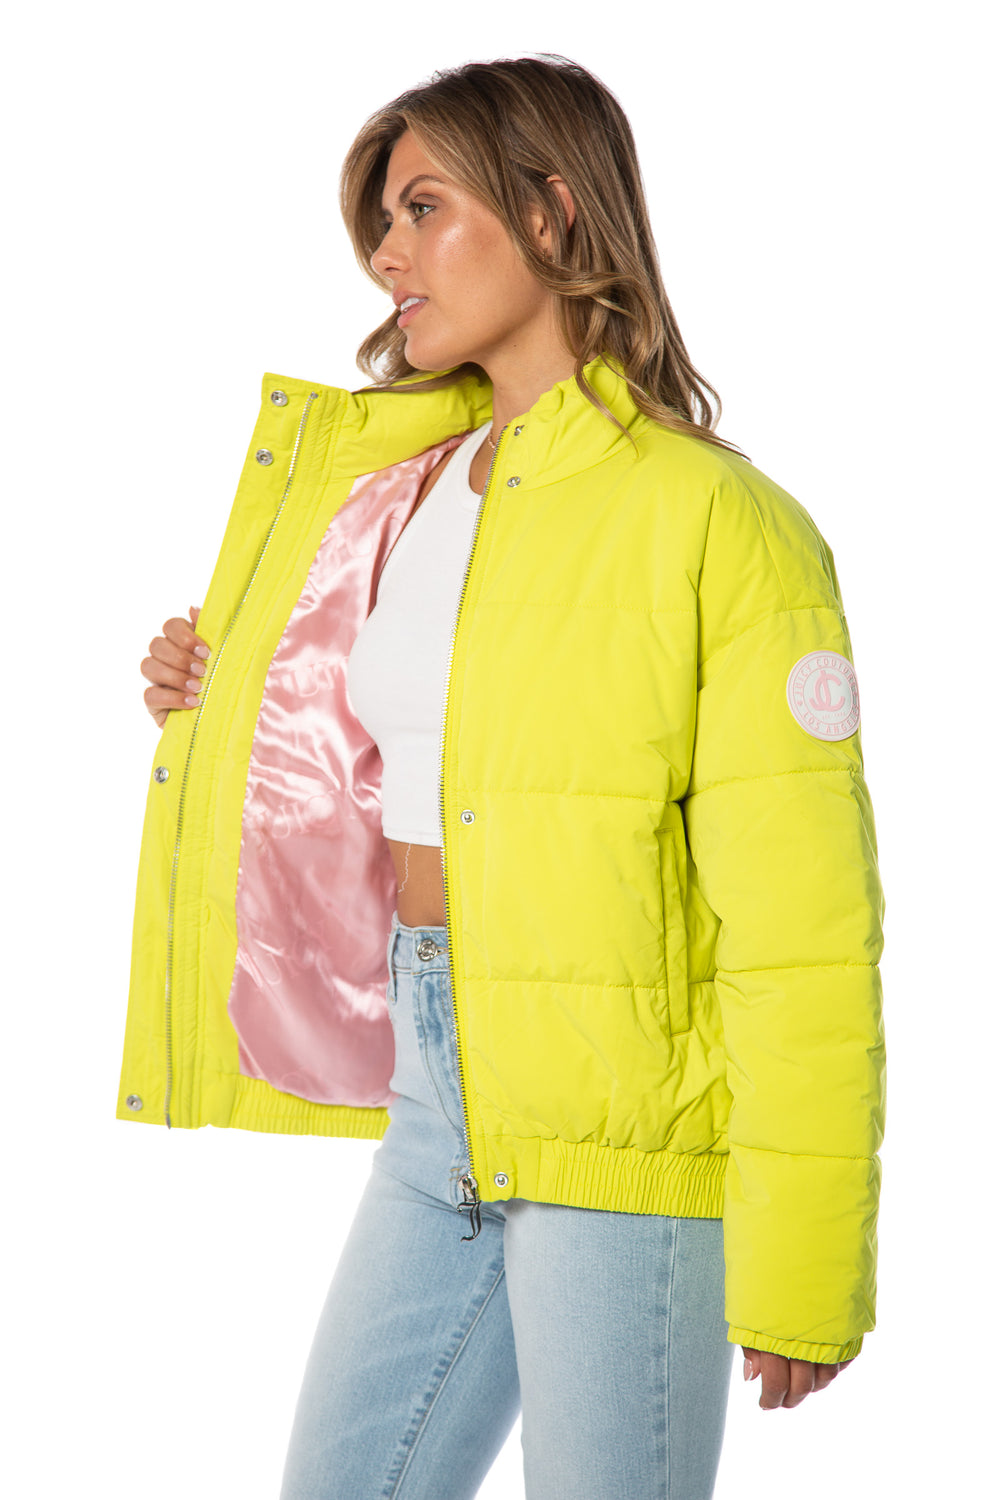 Buy Yellow Colourblocked Puffer Jacket Online in India - Flat 50% Off